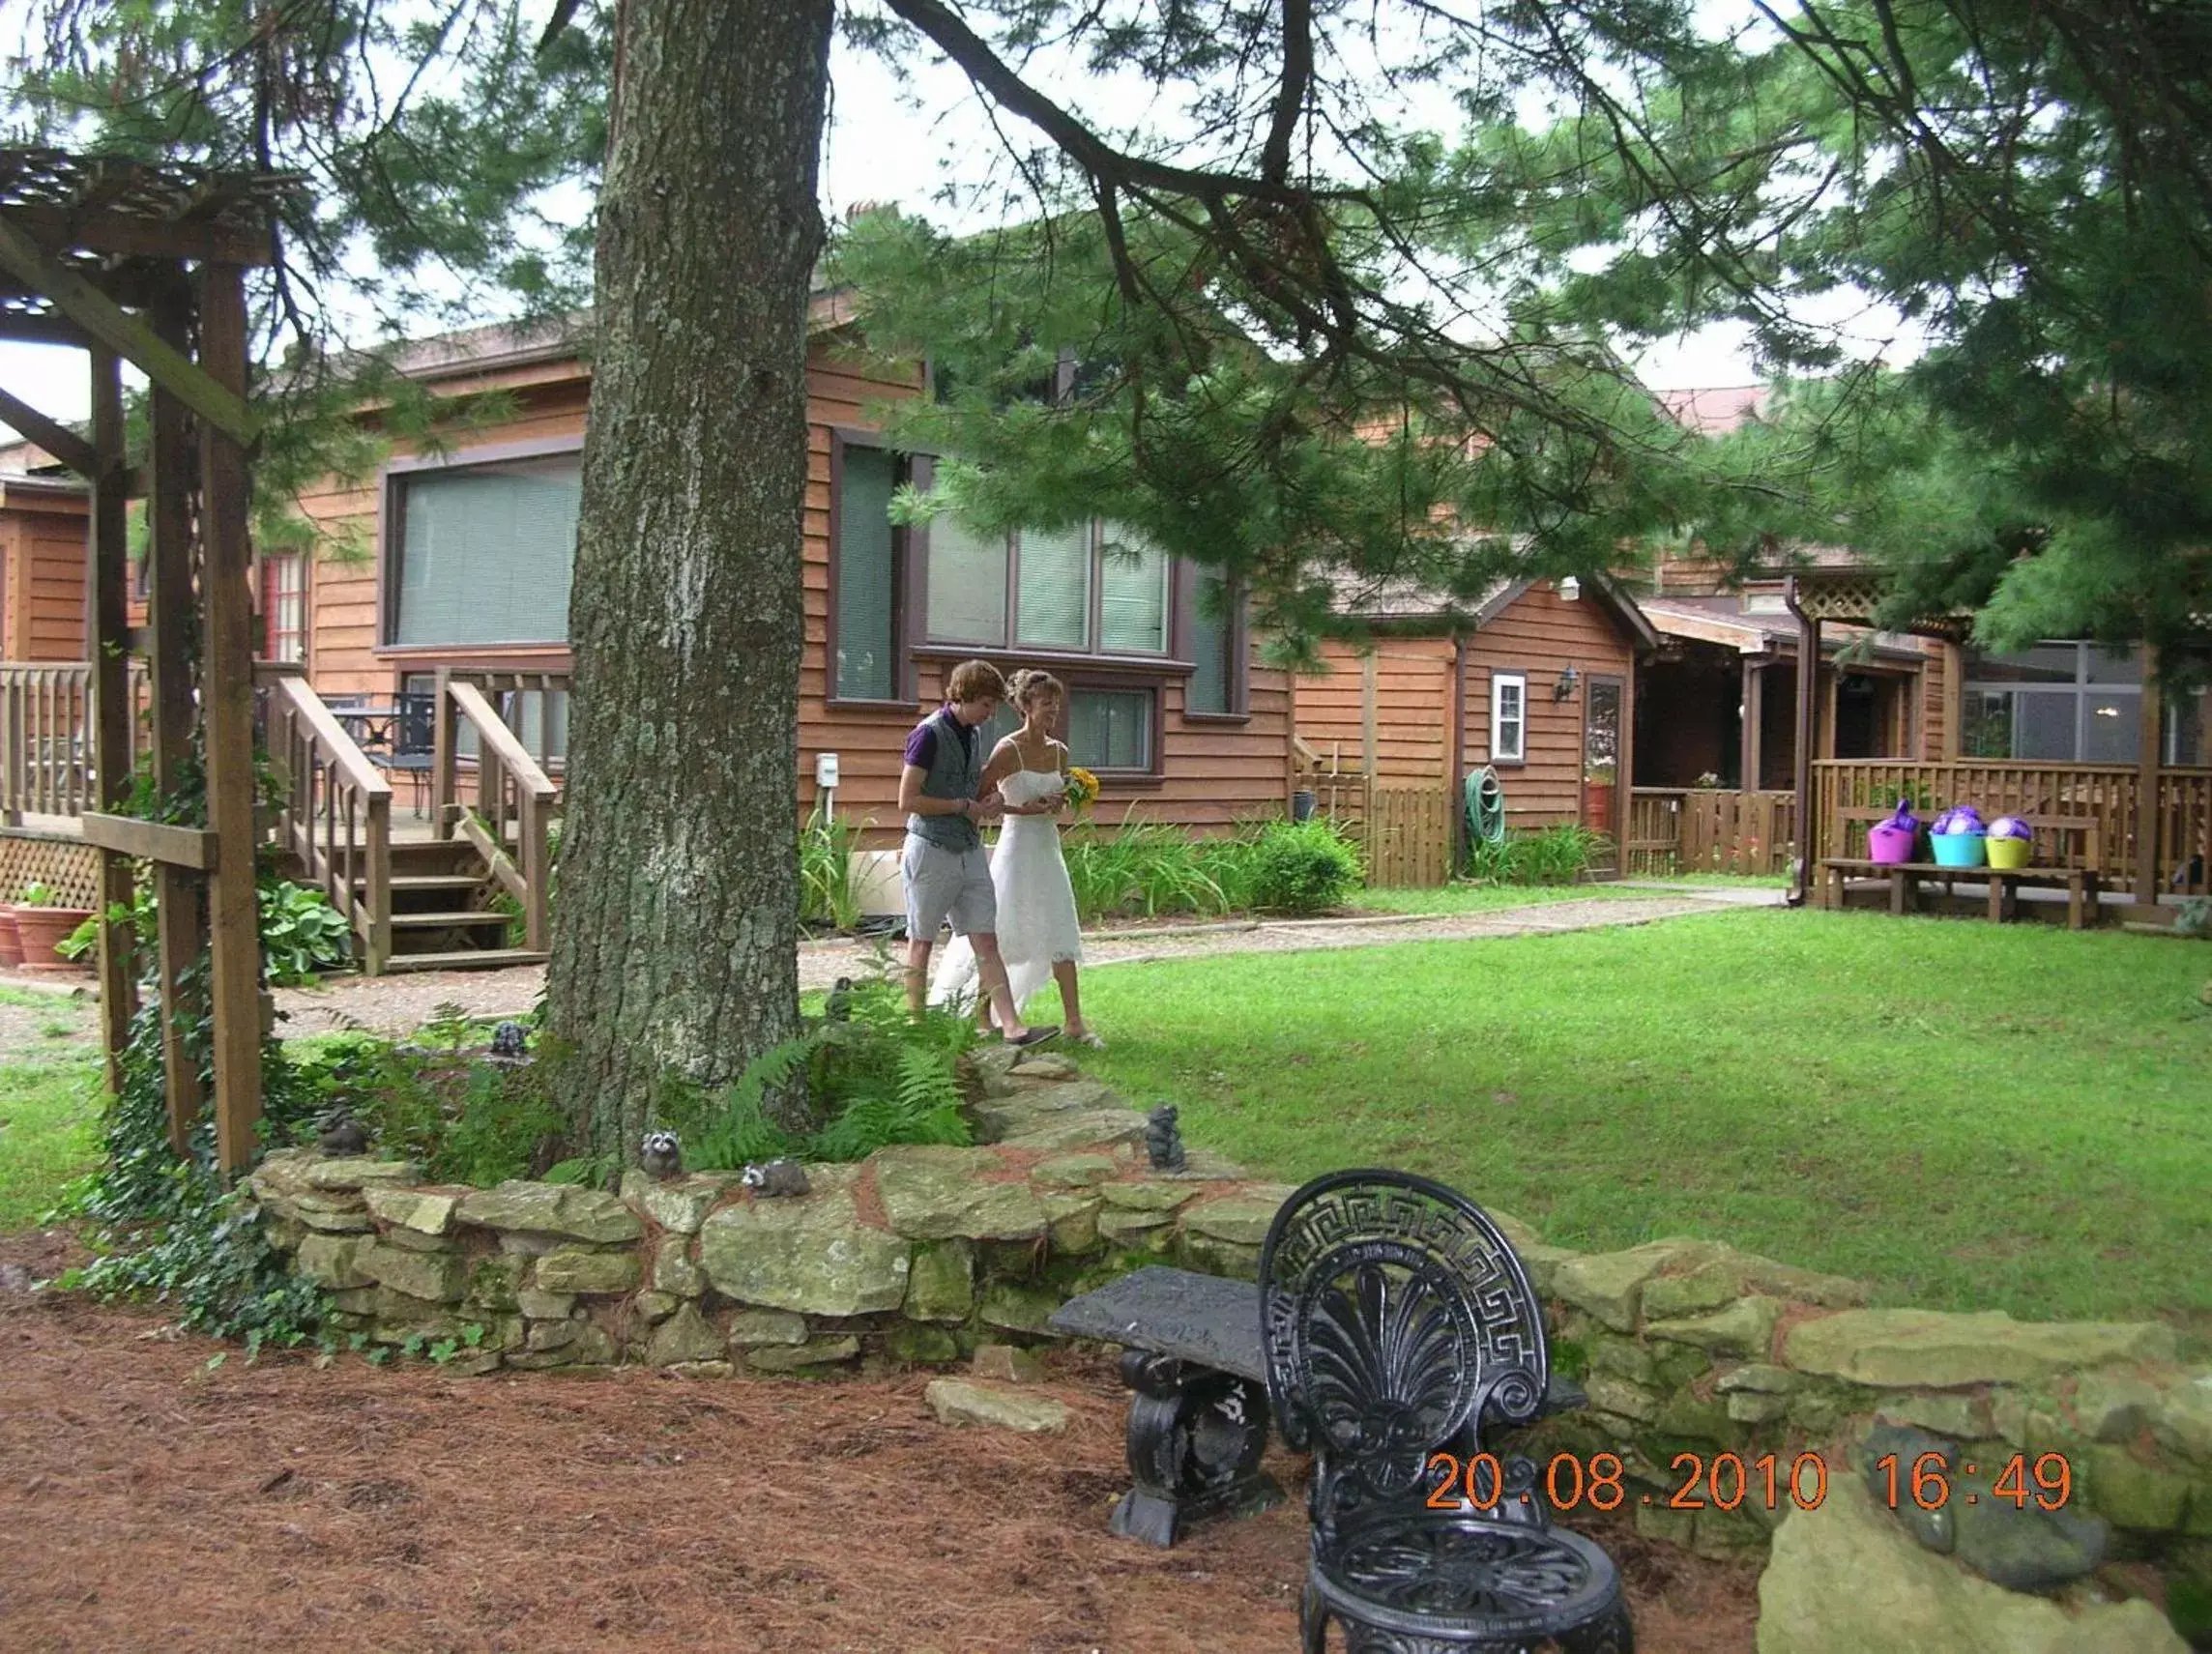 People in Bent Mountain Lodge Bed And Breakfast, Inc.